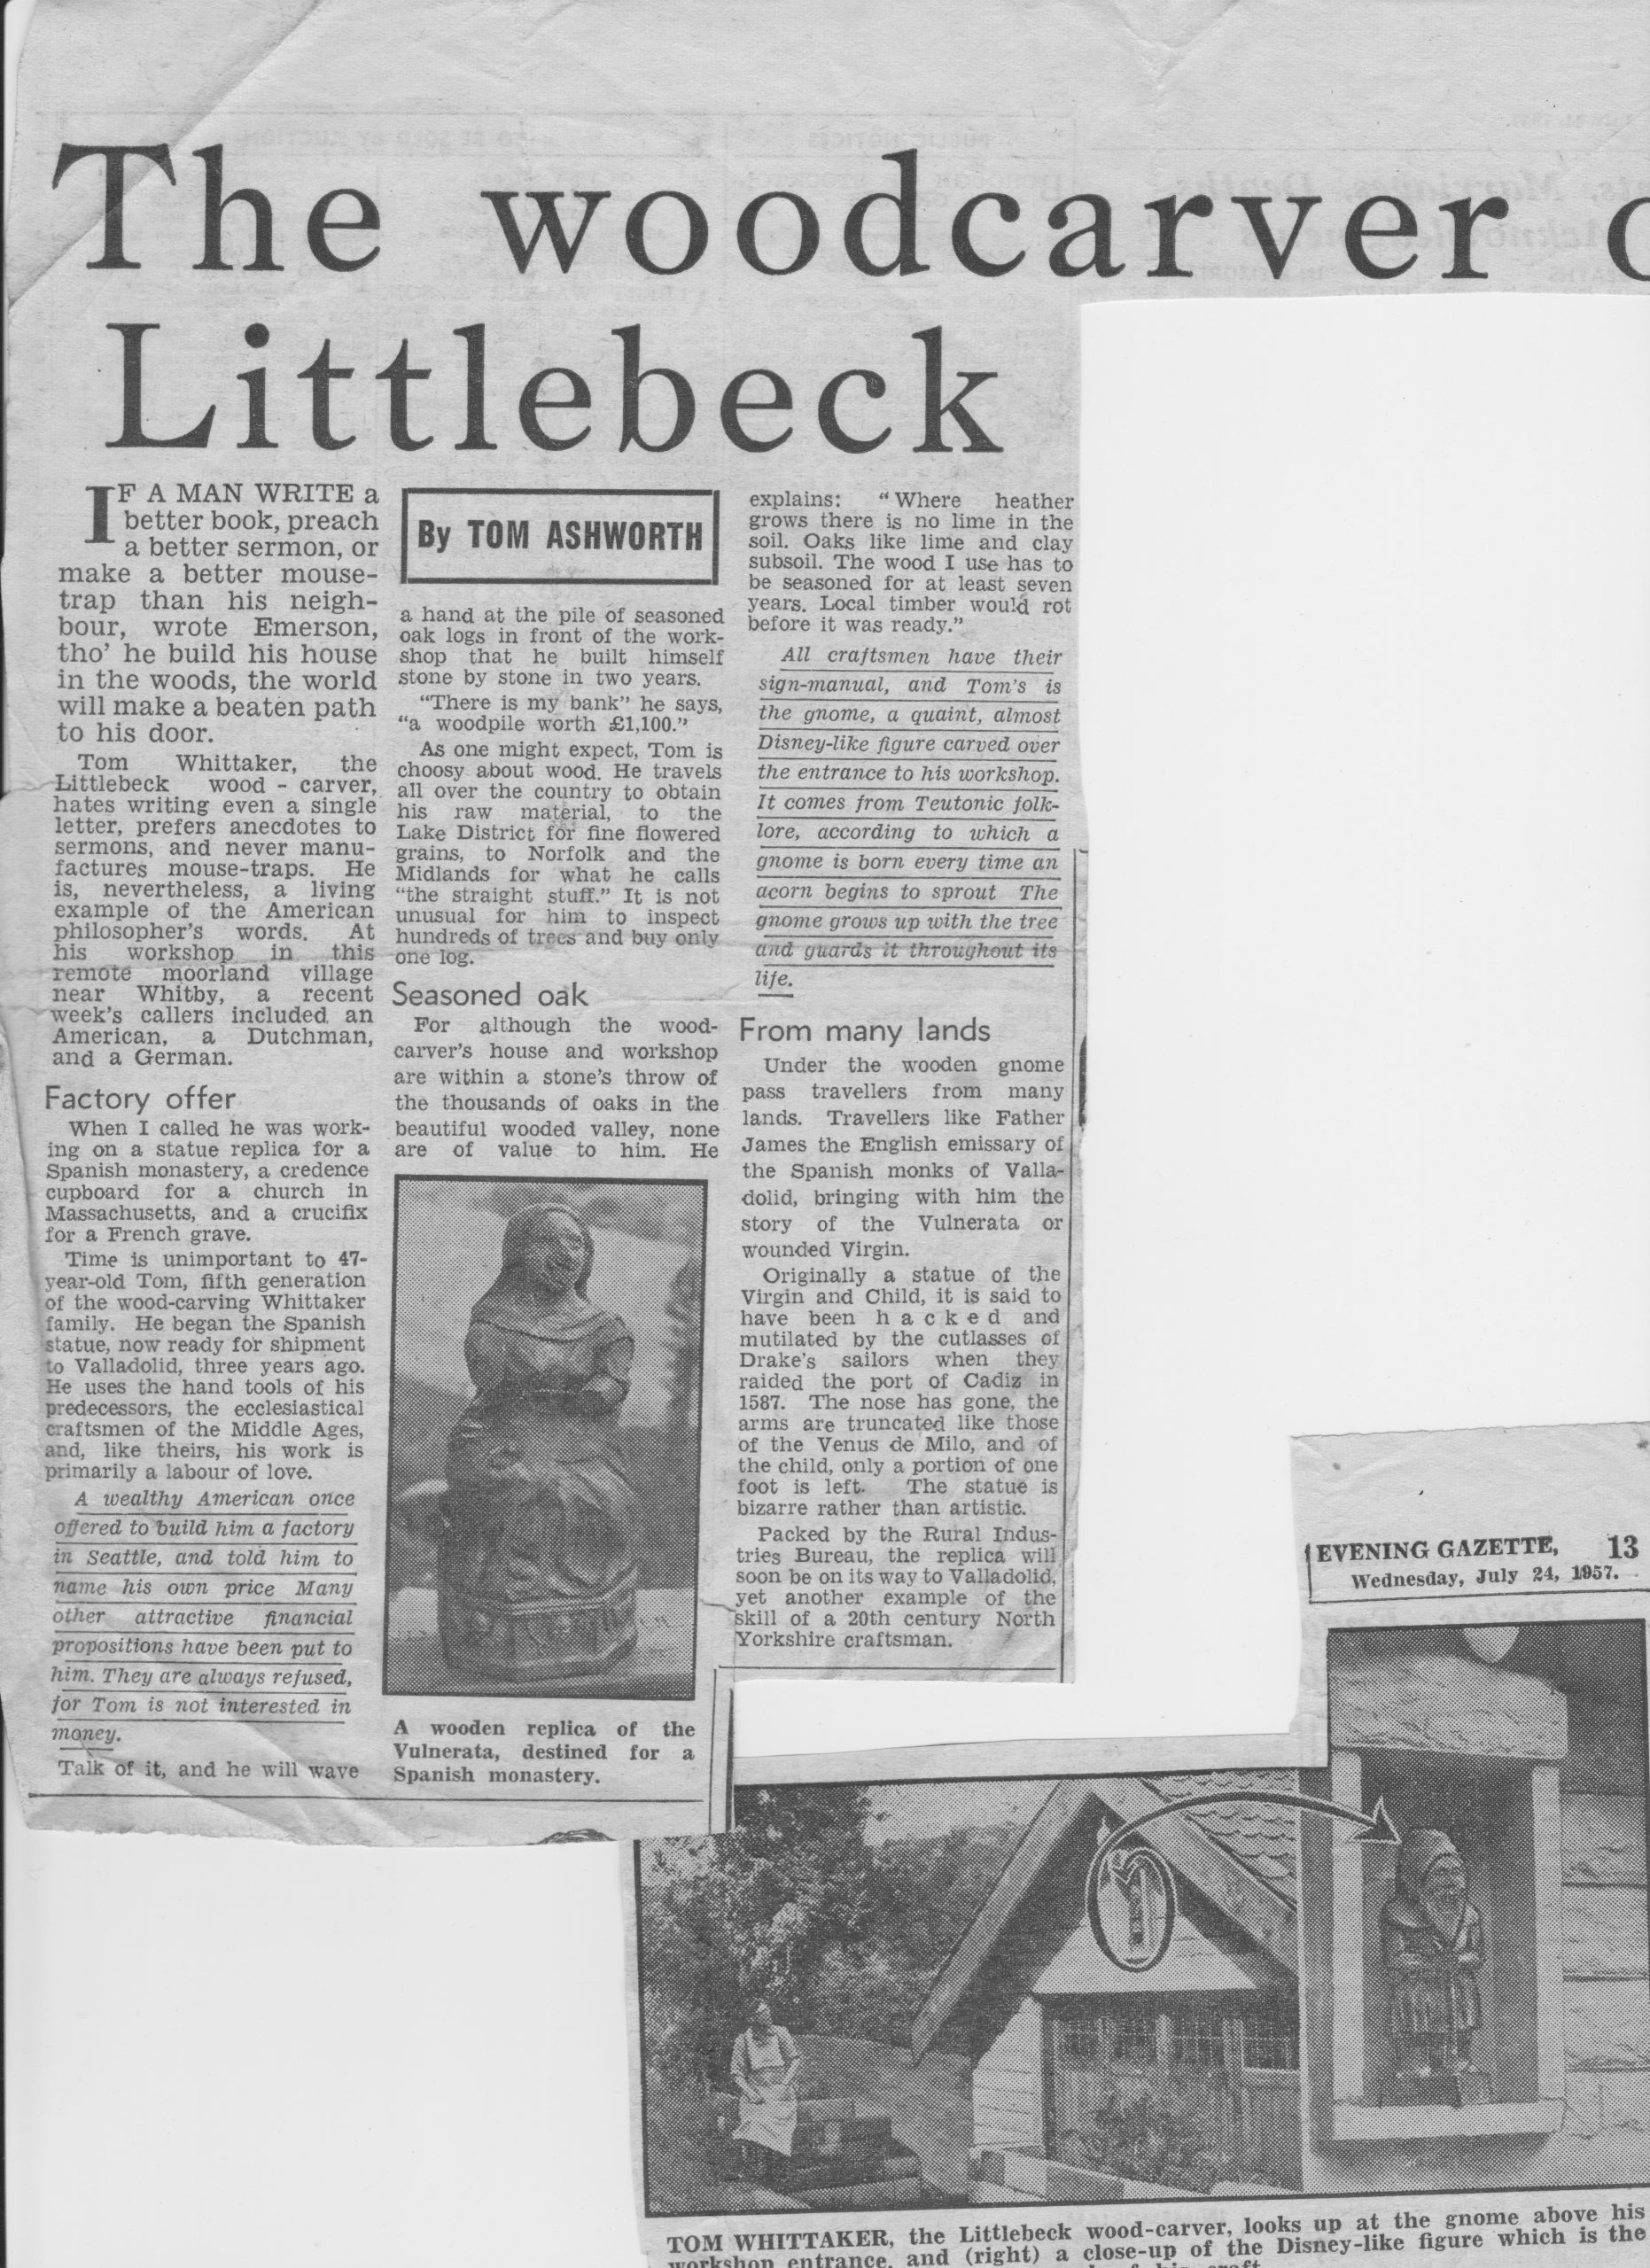 Feature on Littlebeck woodcarver